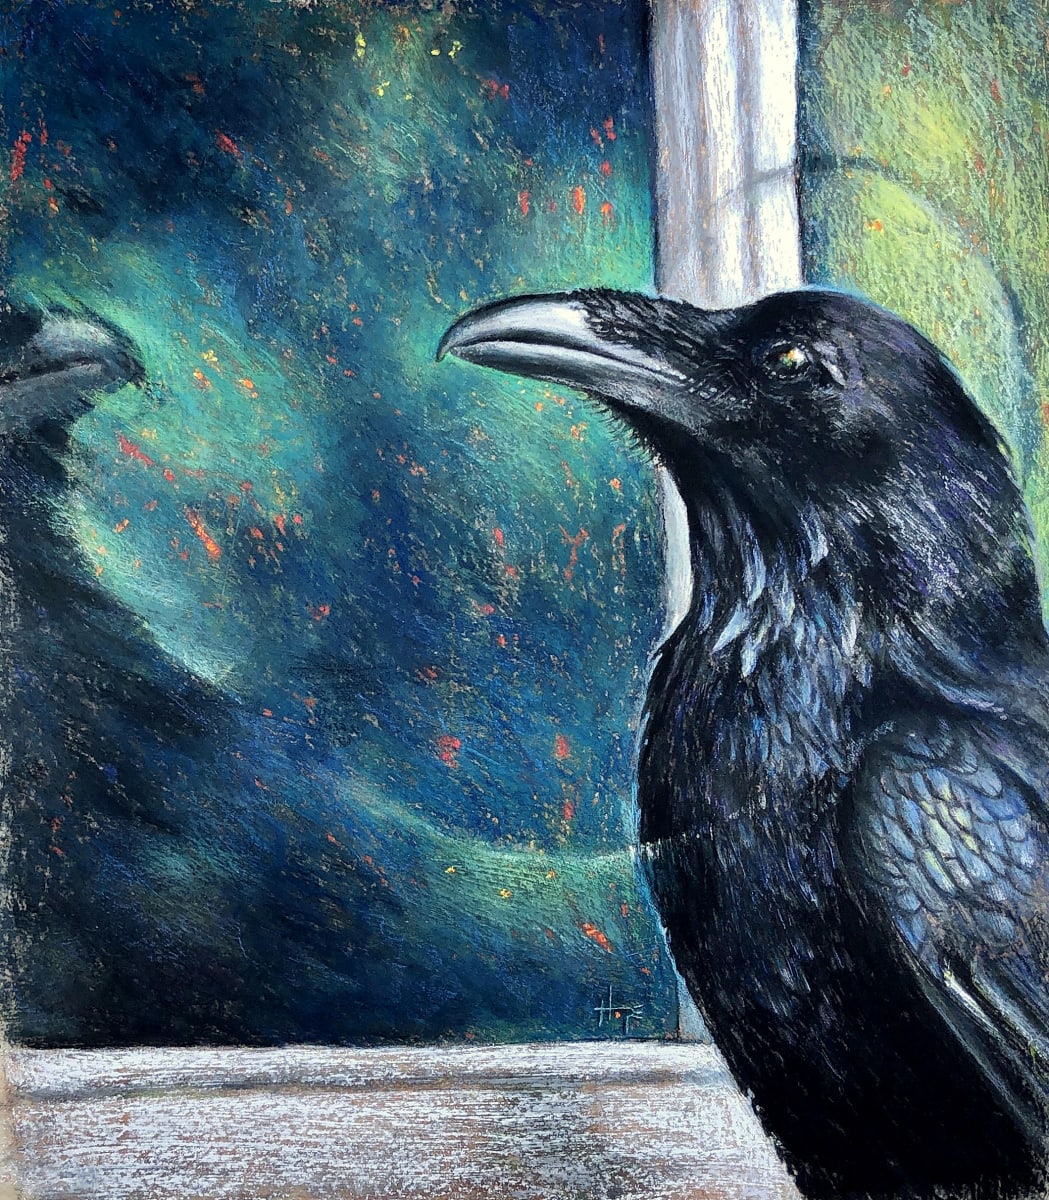 Two. For Mirth. by Hope Martin  Image: A raven admiring its reflection in a window